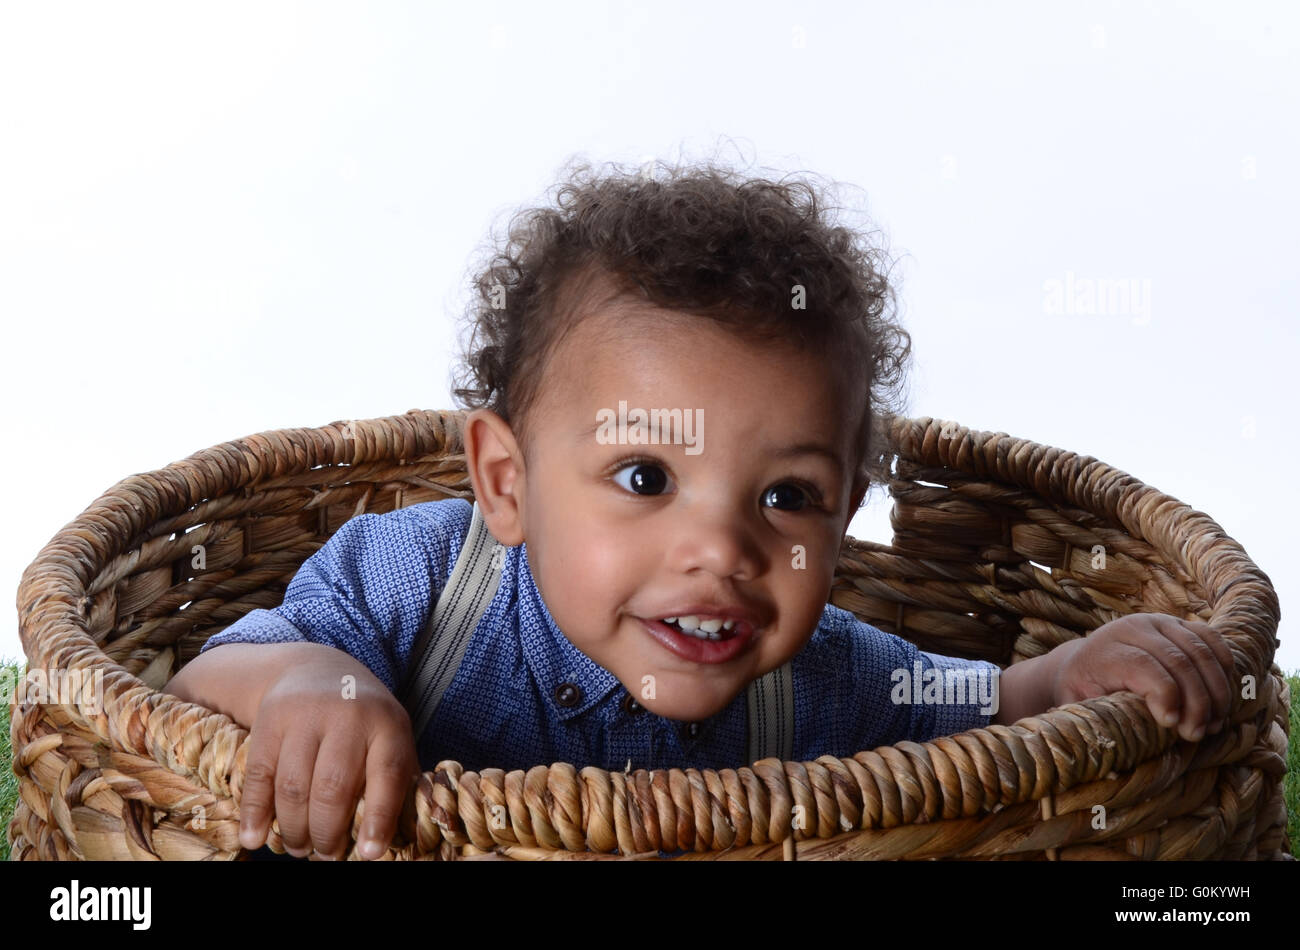 young mixed race, ethnic boy playing and exploring in a wicker basket Stock Photo